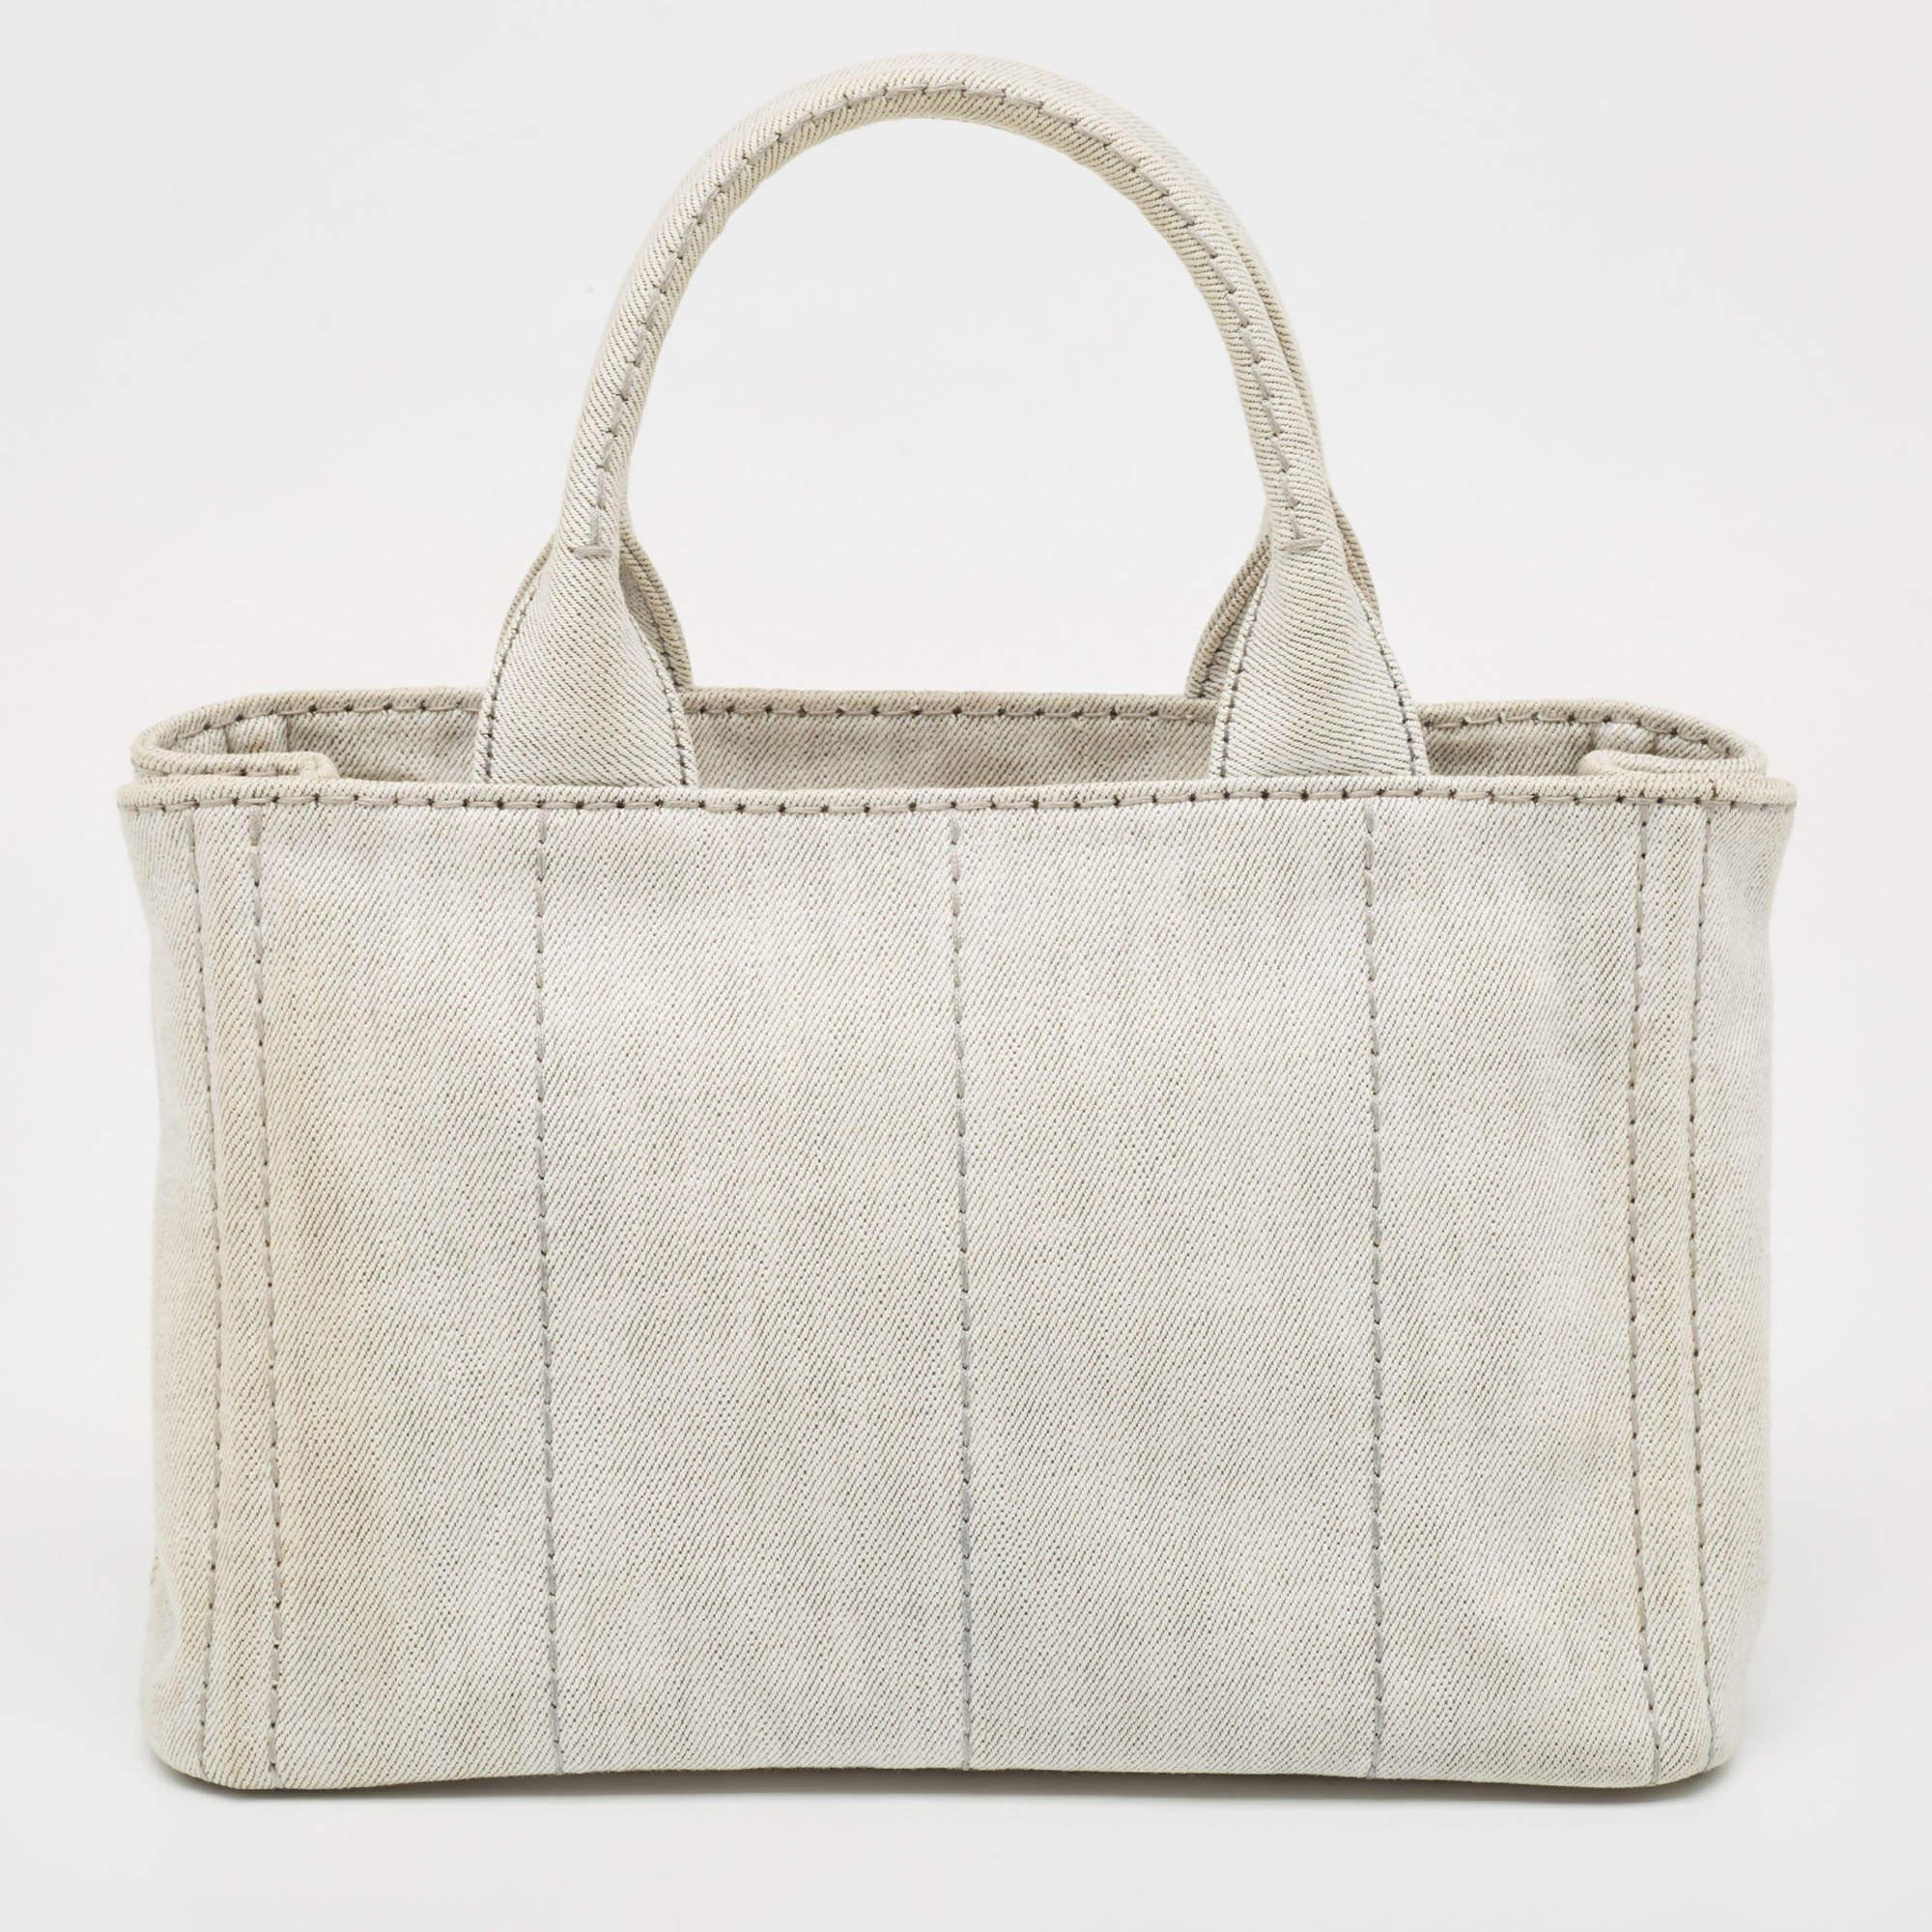 A creation that is both highly functional and appealing is this tote by Prada. Crafted from denim, this tote is held by dual handles and equipped with a spacious interior to hold your essentials with ease.

Includes: Authenticity Card, Info Booklet,